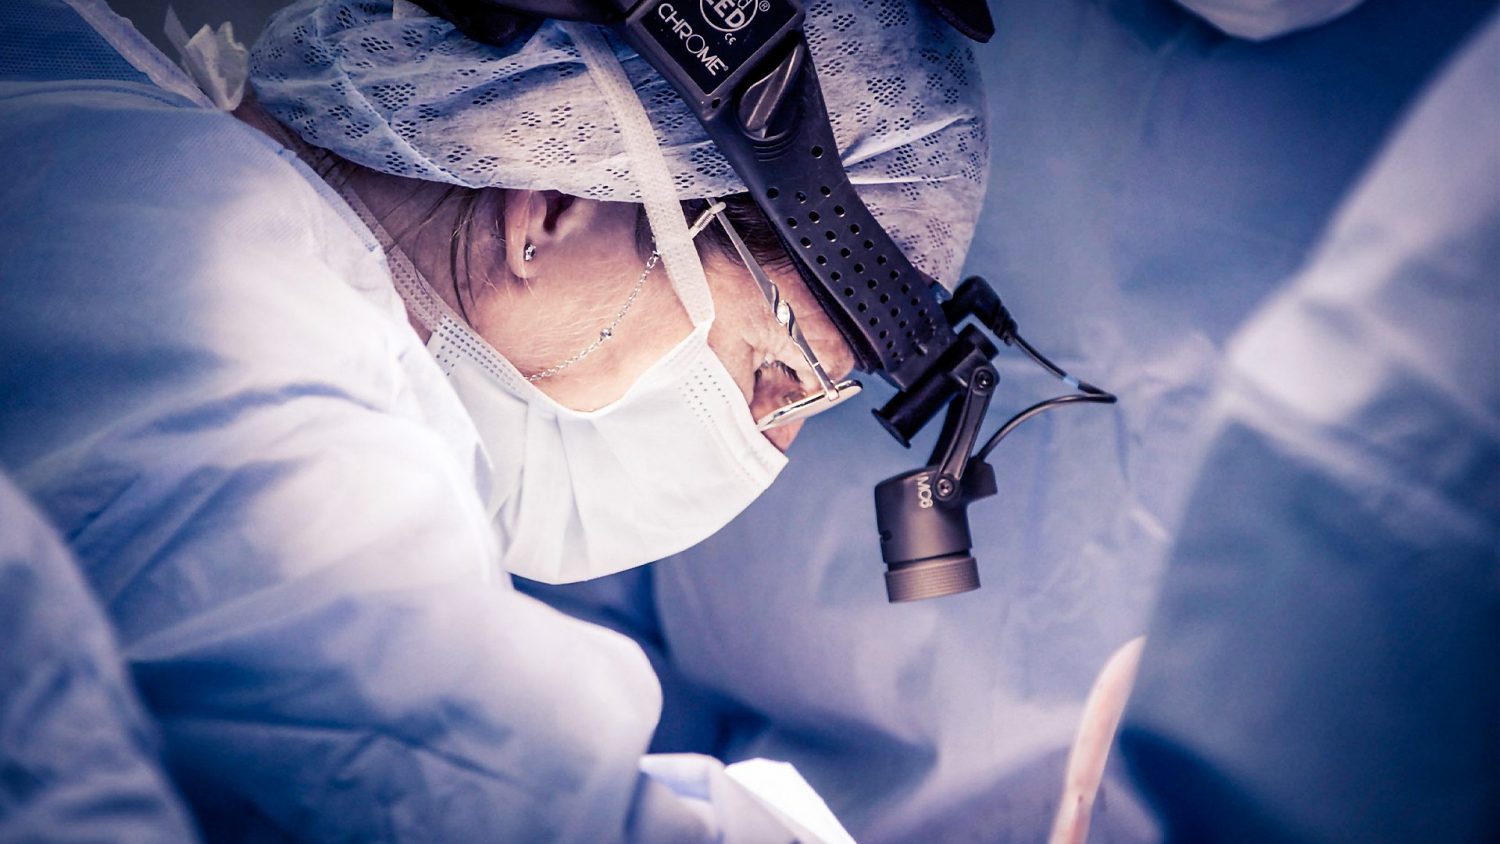 BBC Two Documentary, Surgeons: At the Edge of Life